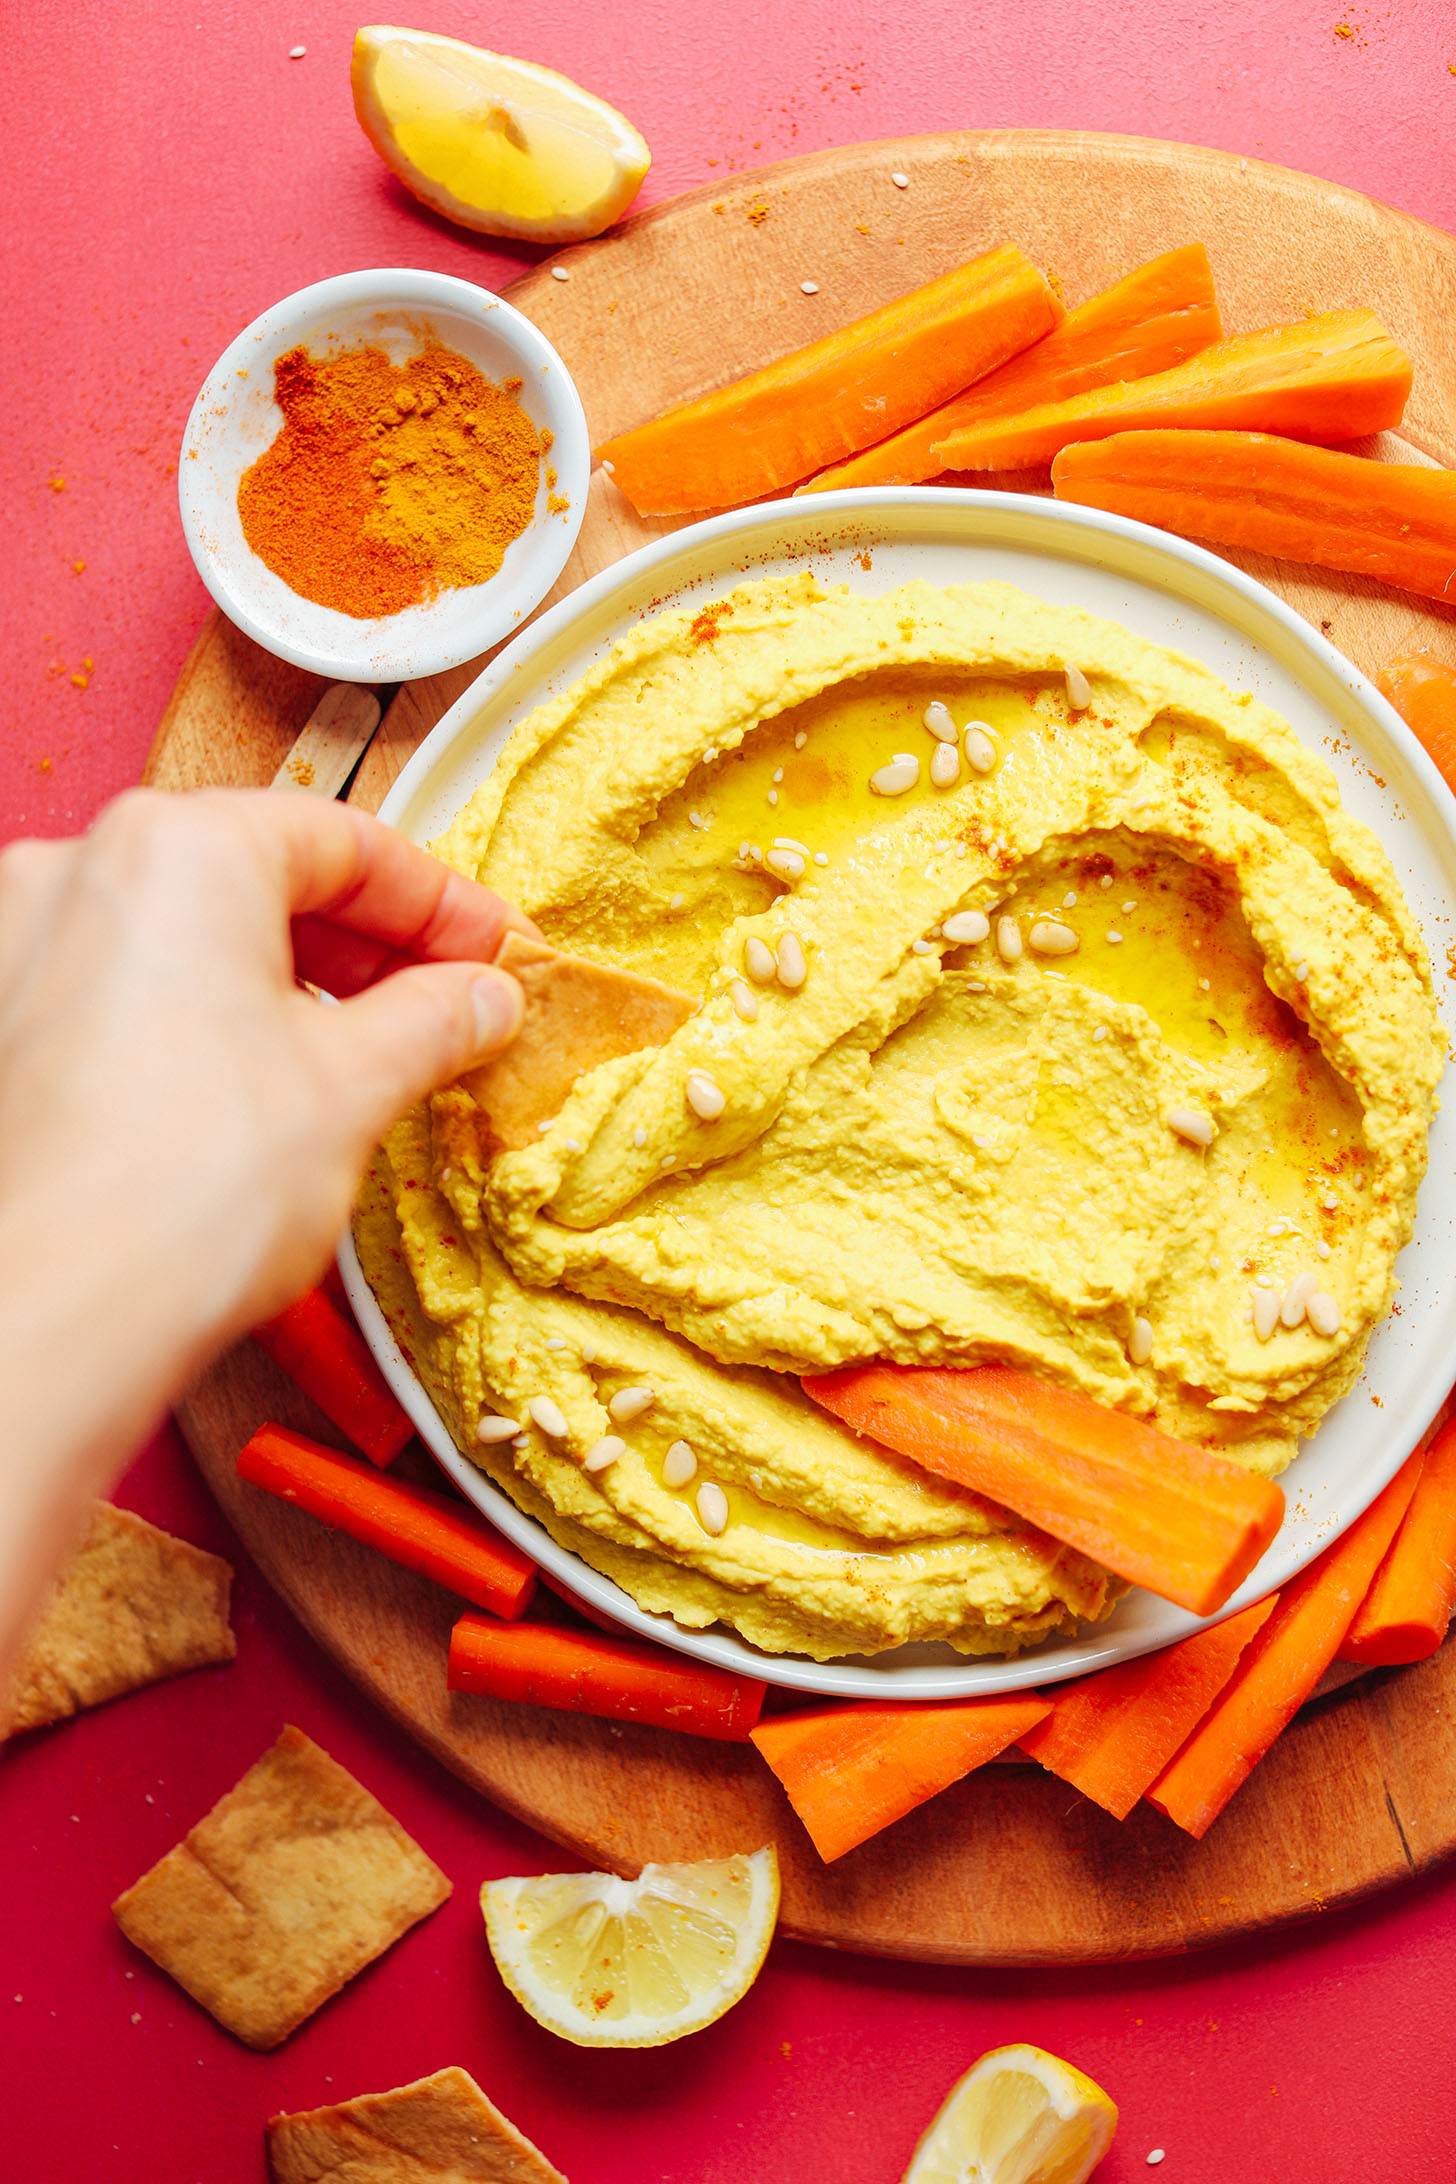 Using a tortilla chip to grab a scoop of Golden Goddess Hummus made with turmeric